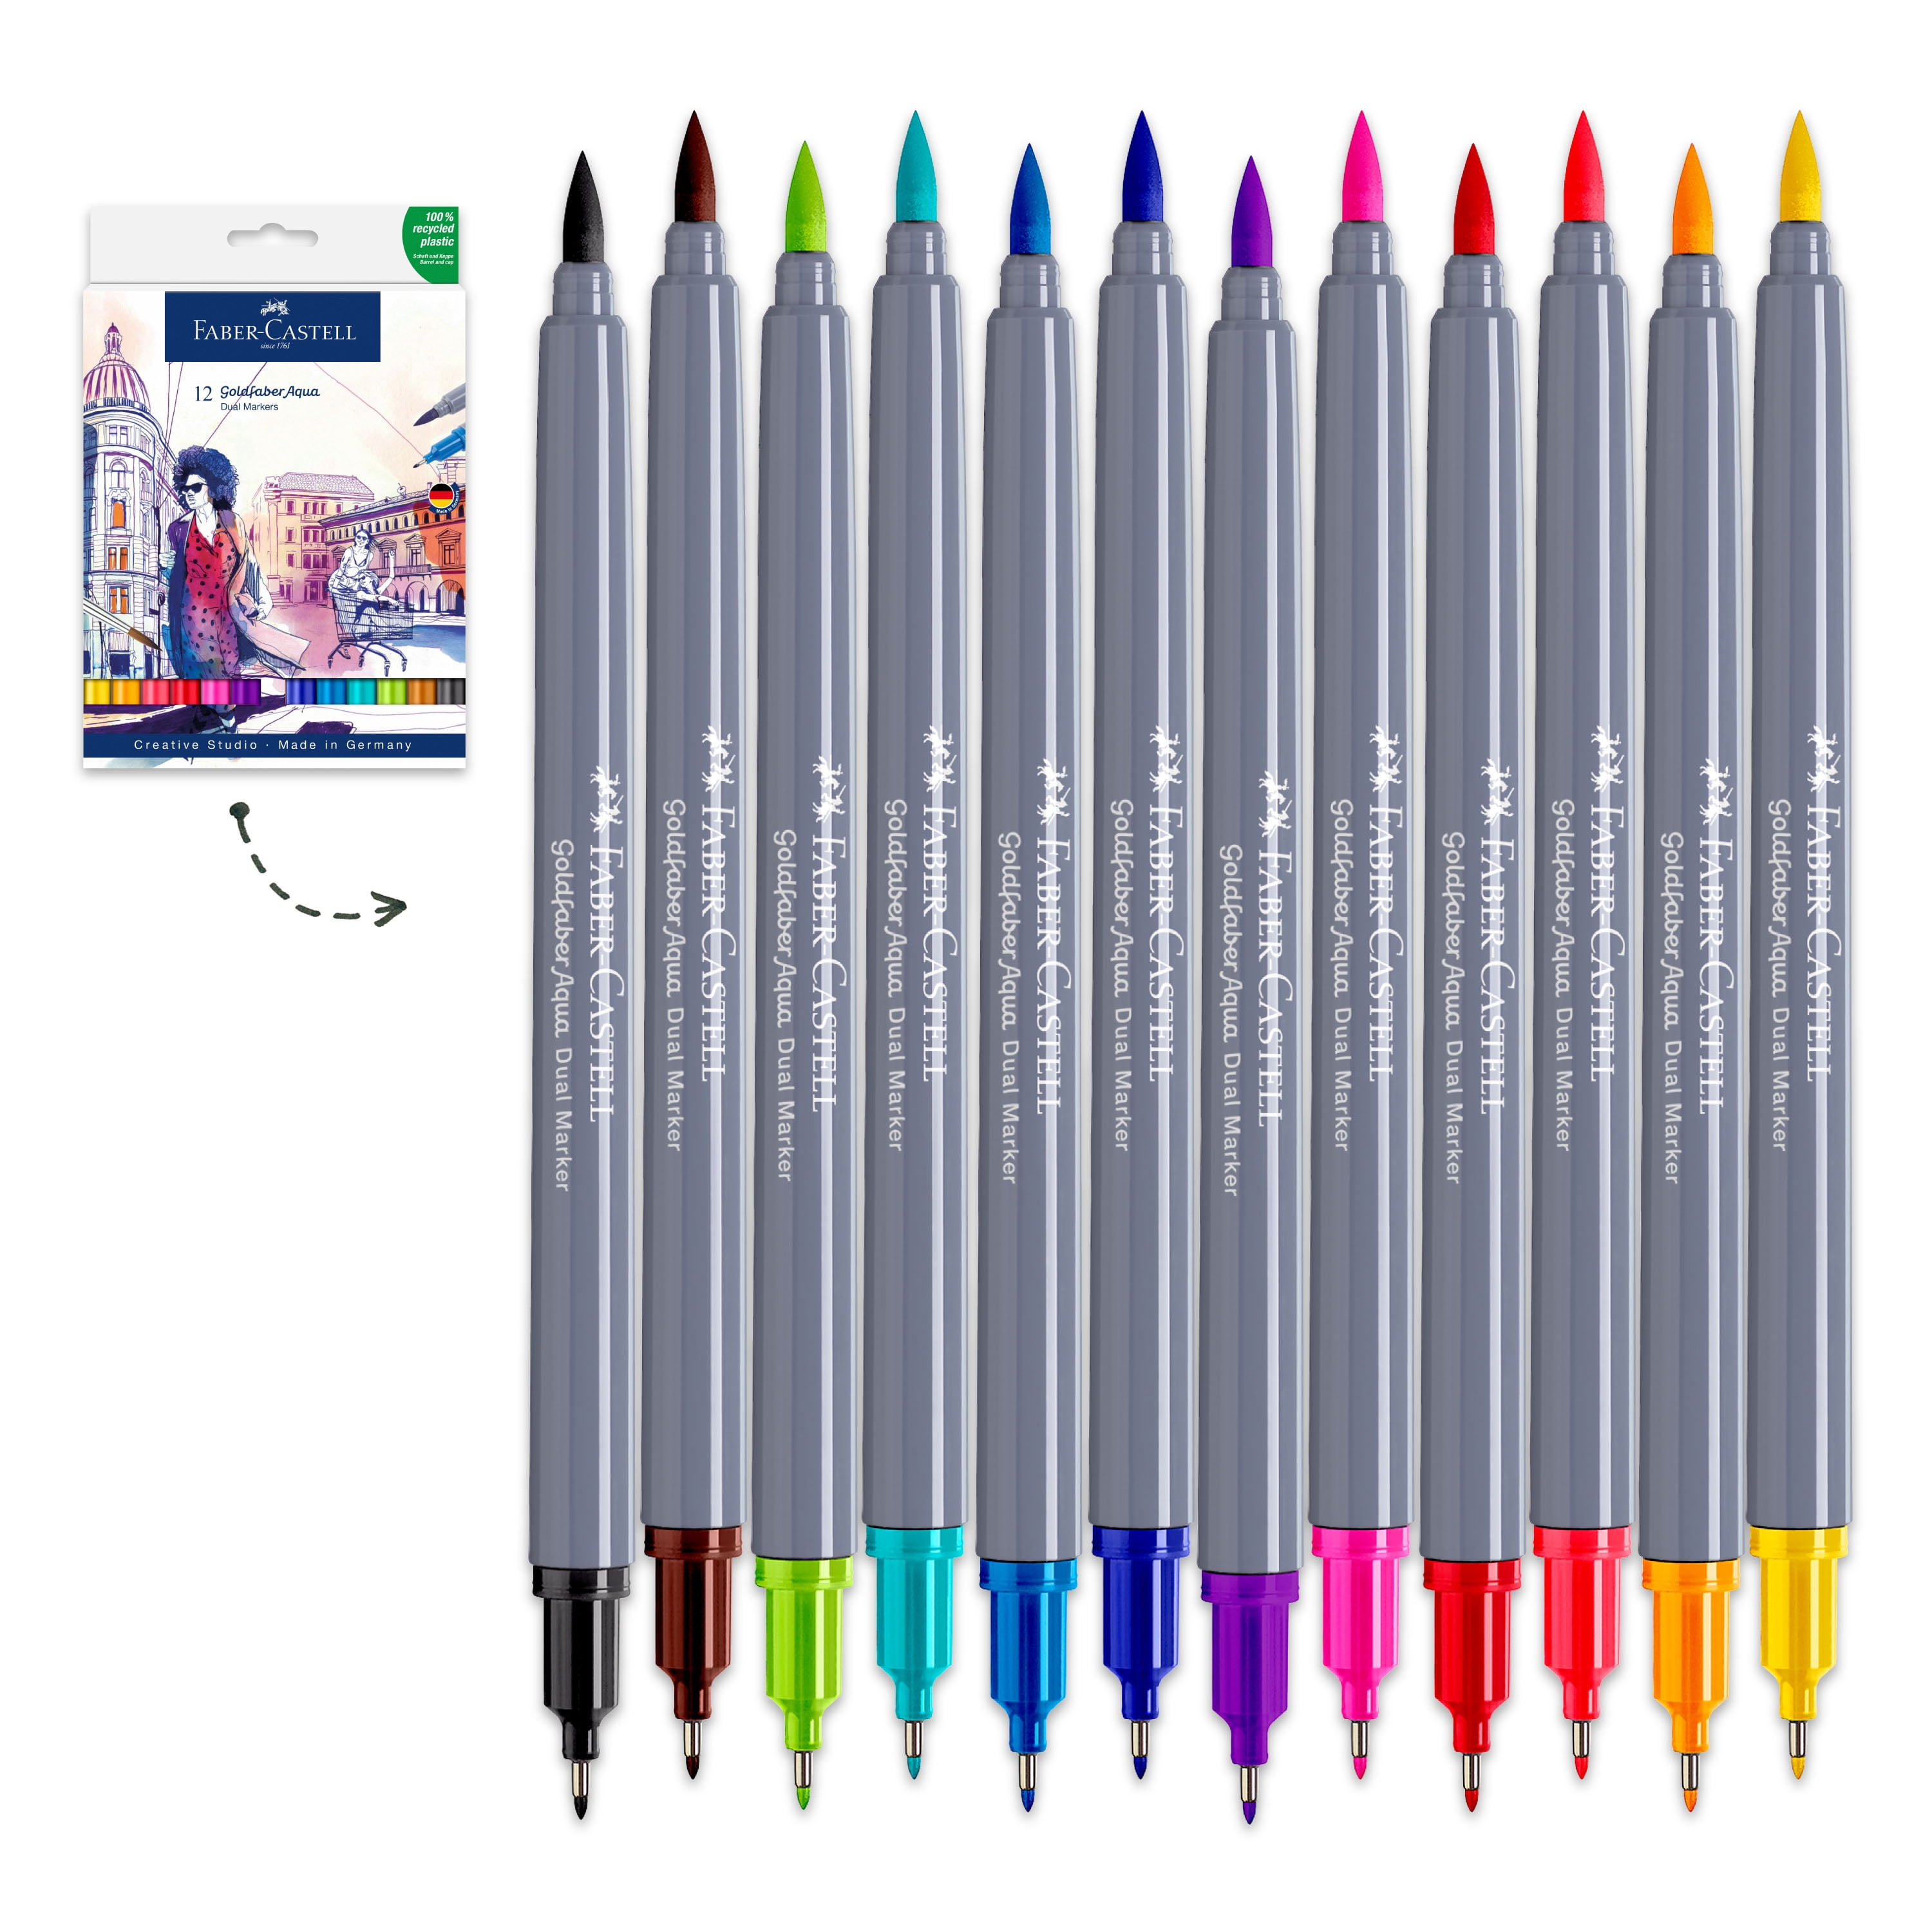 Faber-Castell Markers - Fineliner - 20 pcs. - Multi